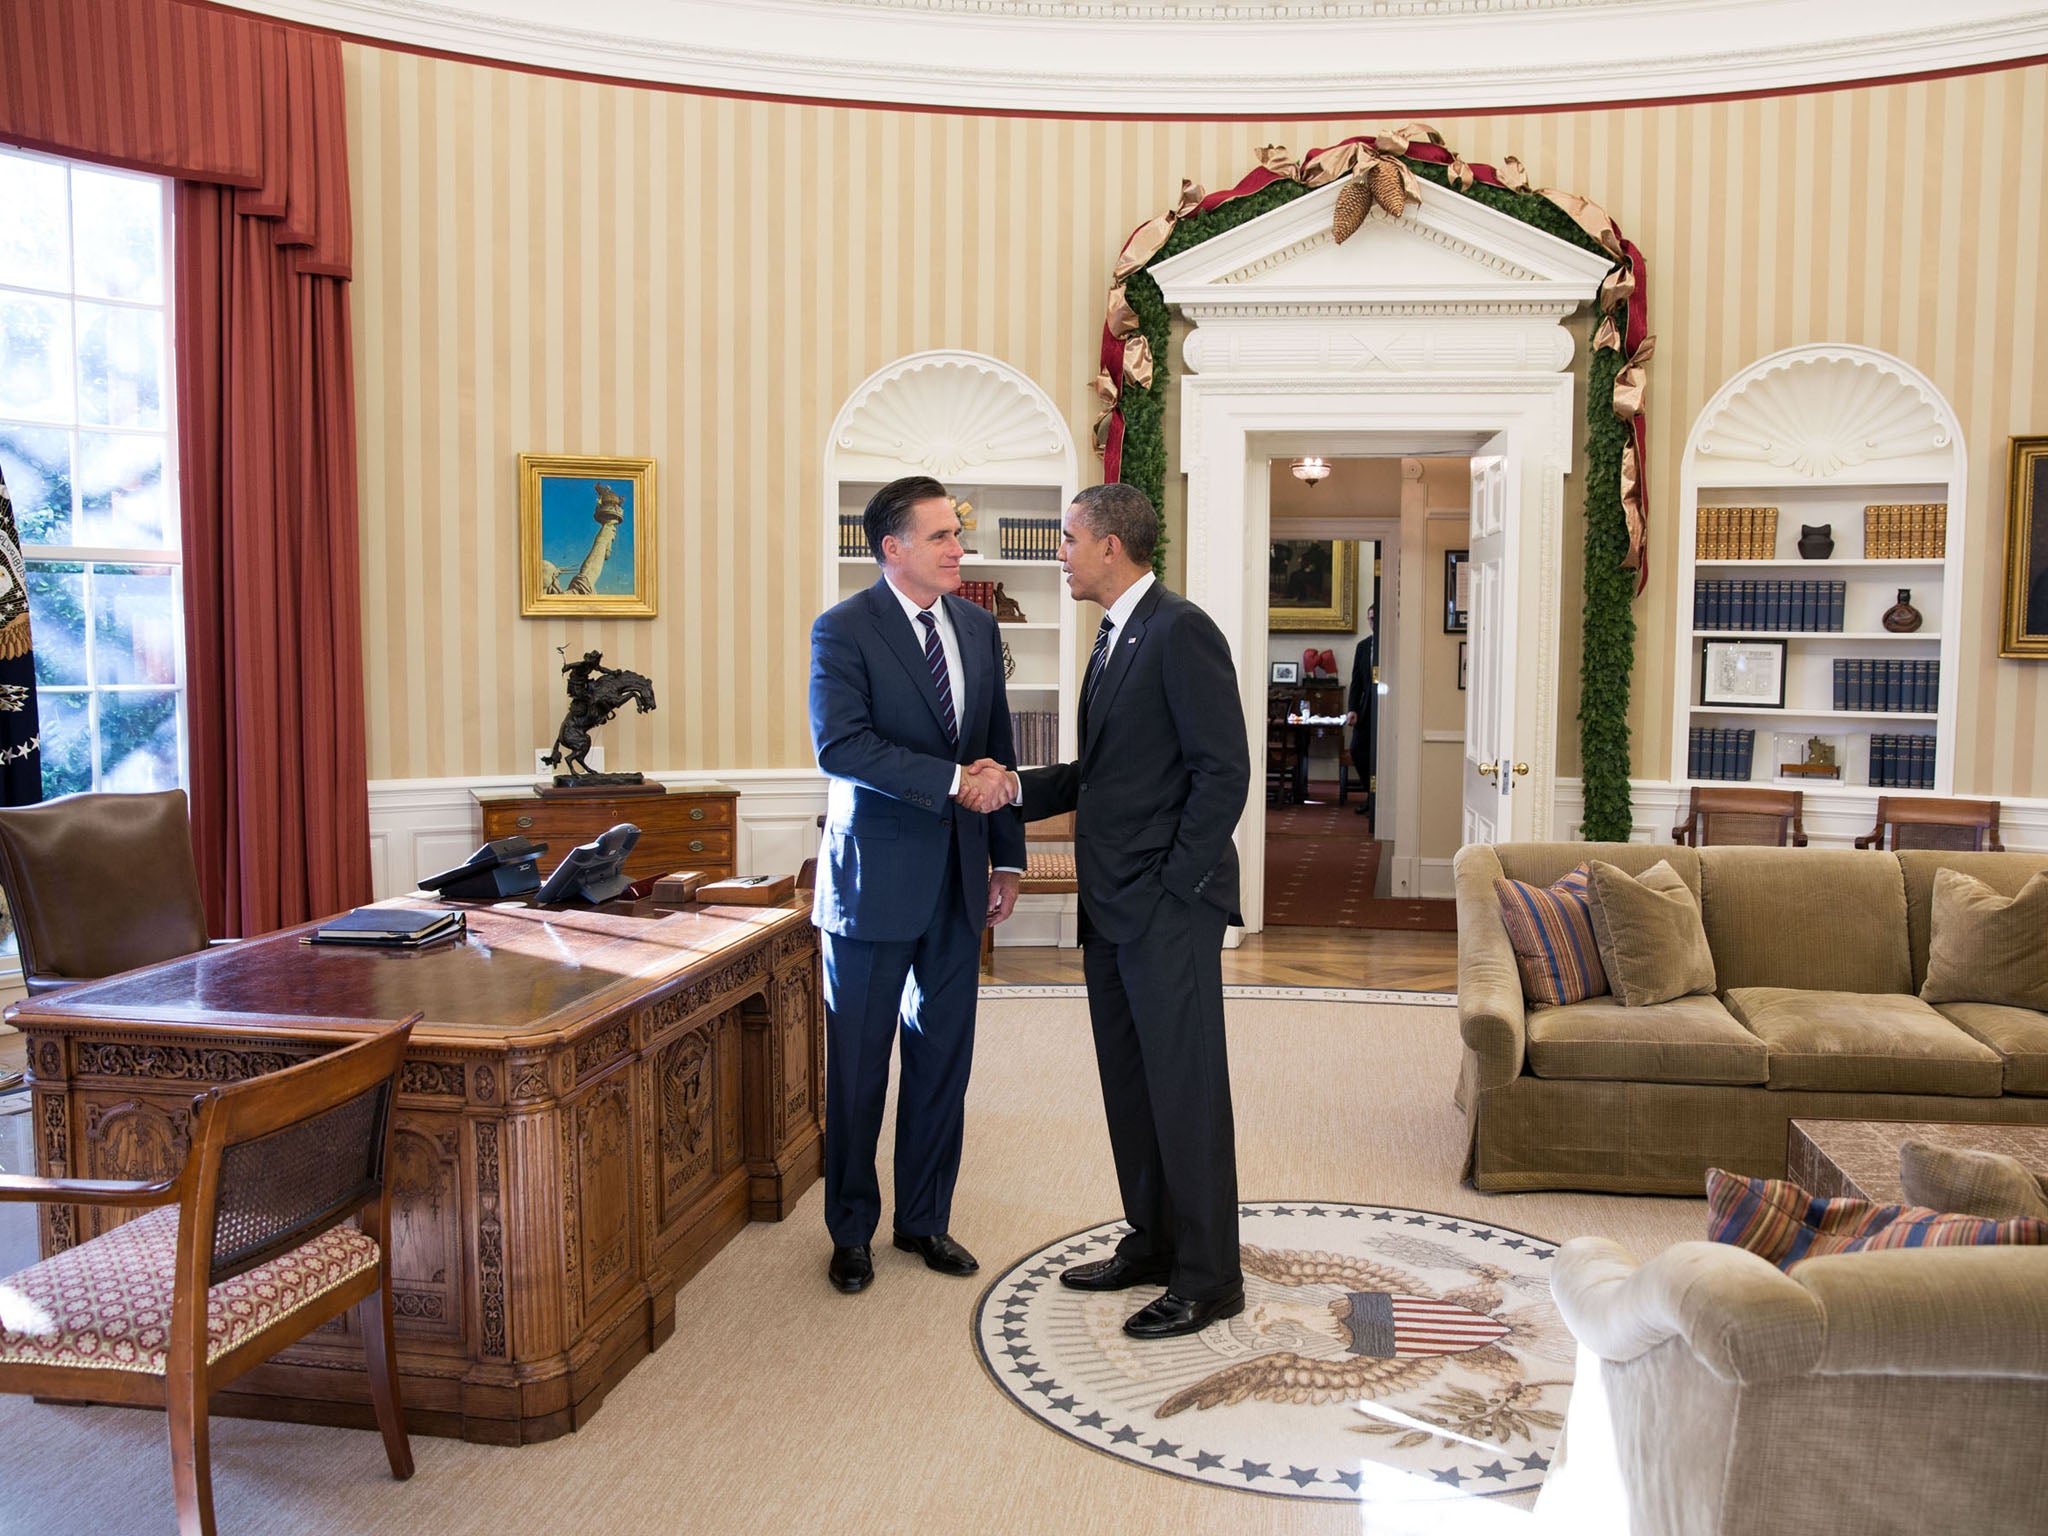 Former Massachusetts governor Mitt Romney shakes hands with President Barack Obama in the Oval Office before lunch Thursday at the White House. The White House reported that Romney congratulated Obama on his victory and wished him well.